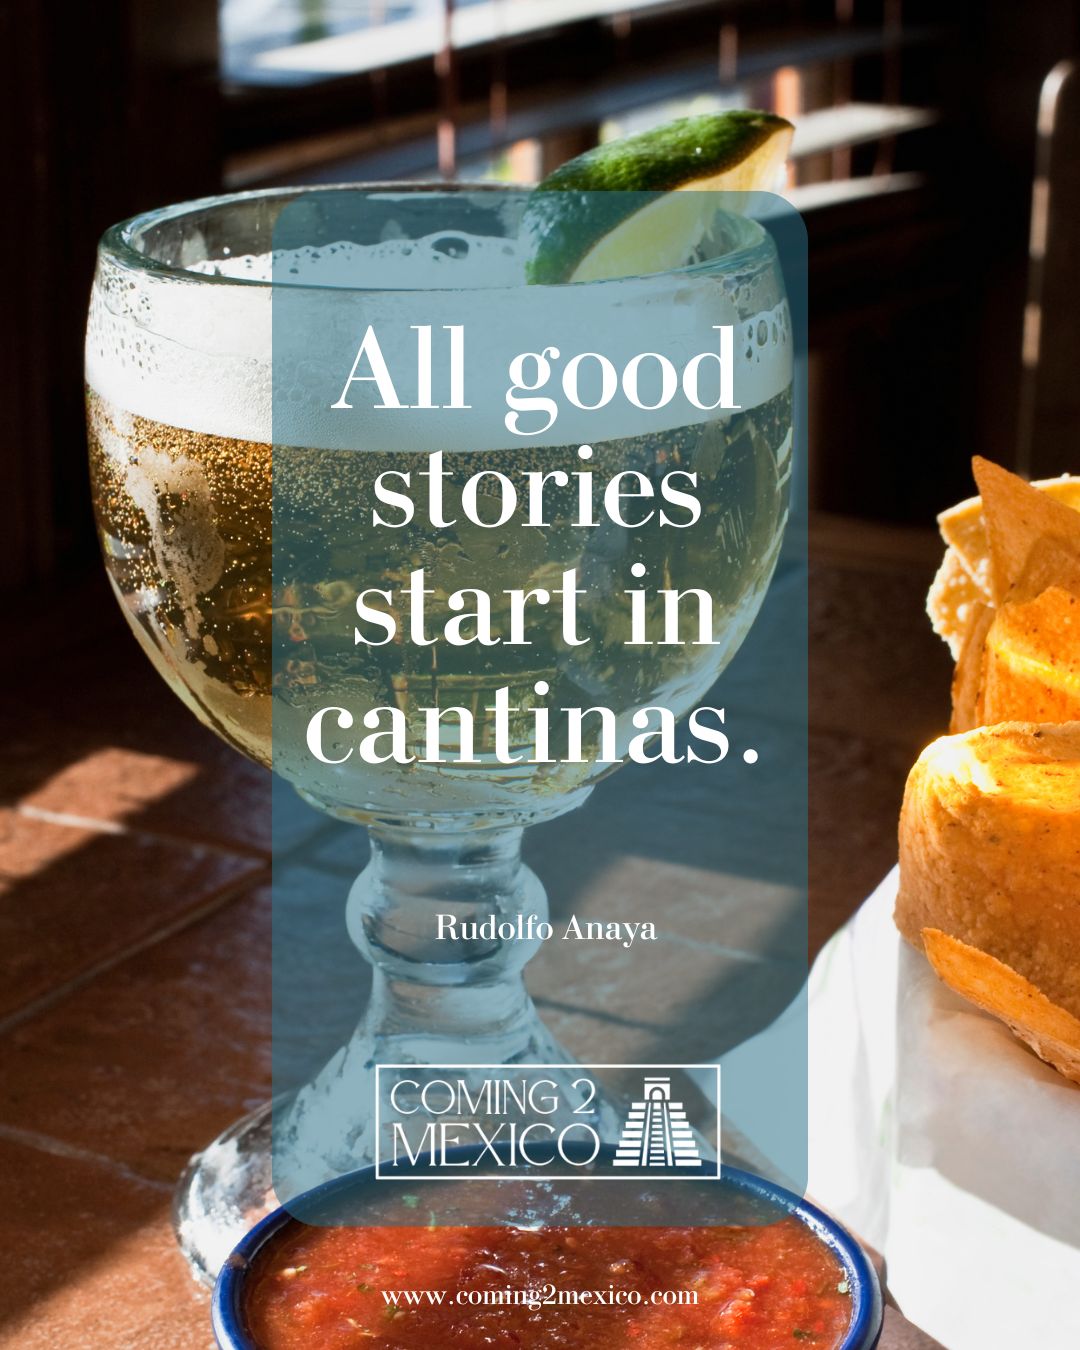 All good stories start in cantinas.